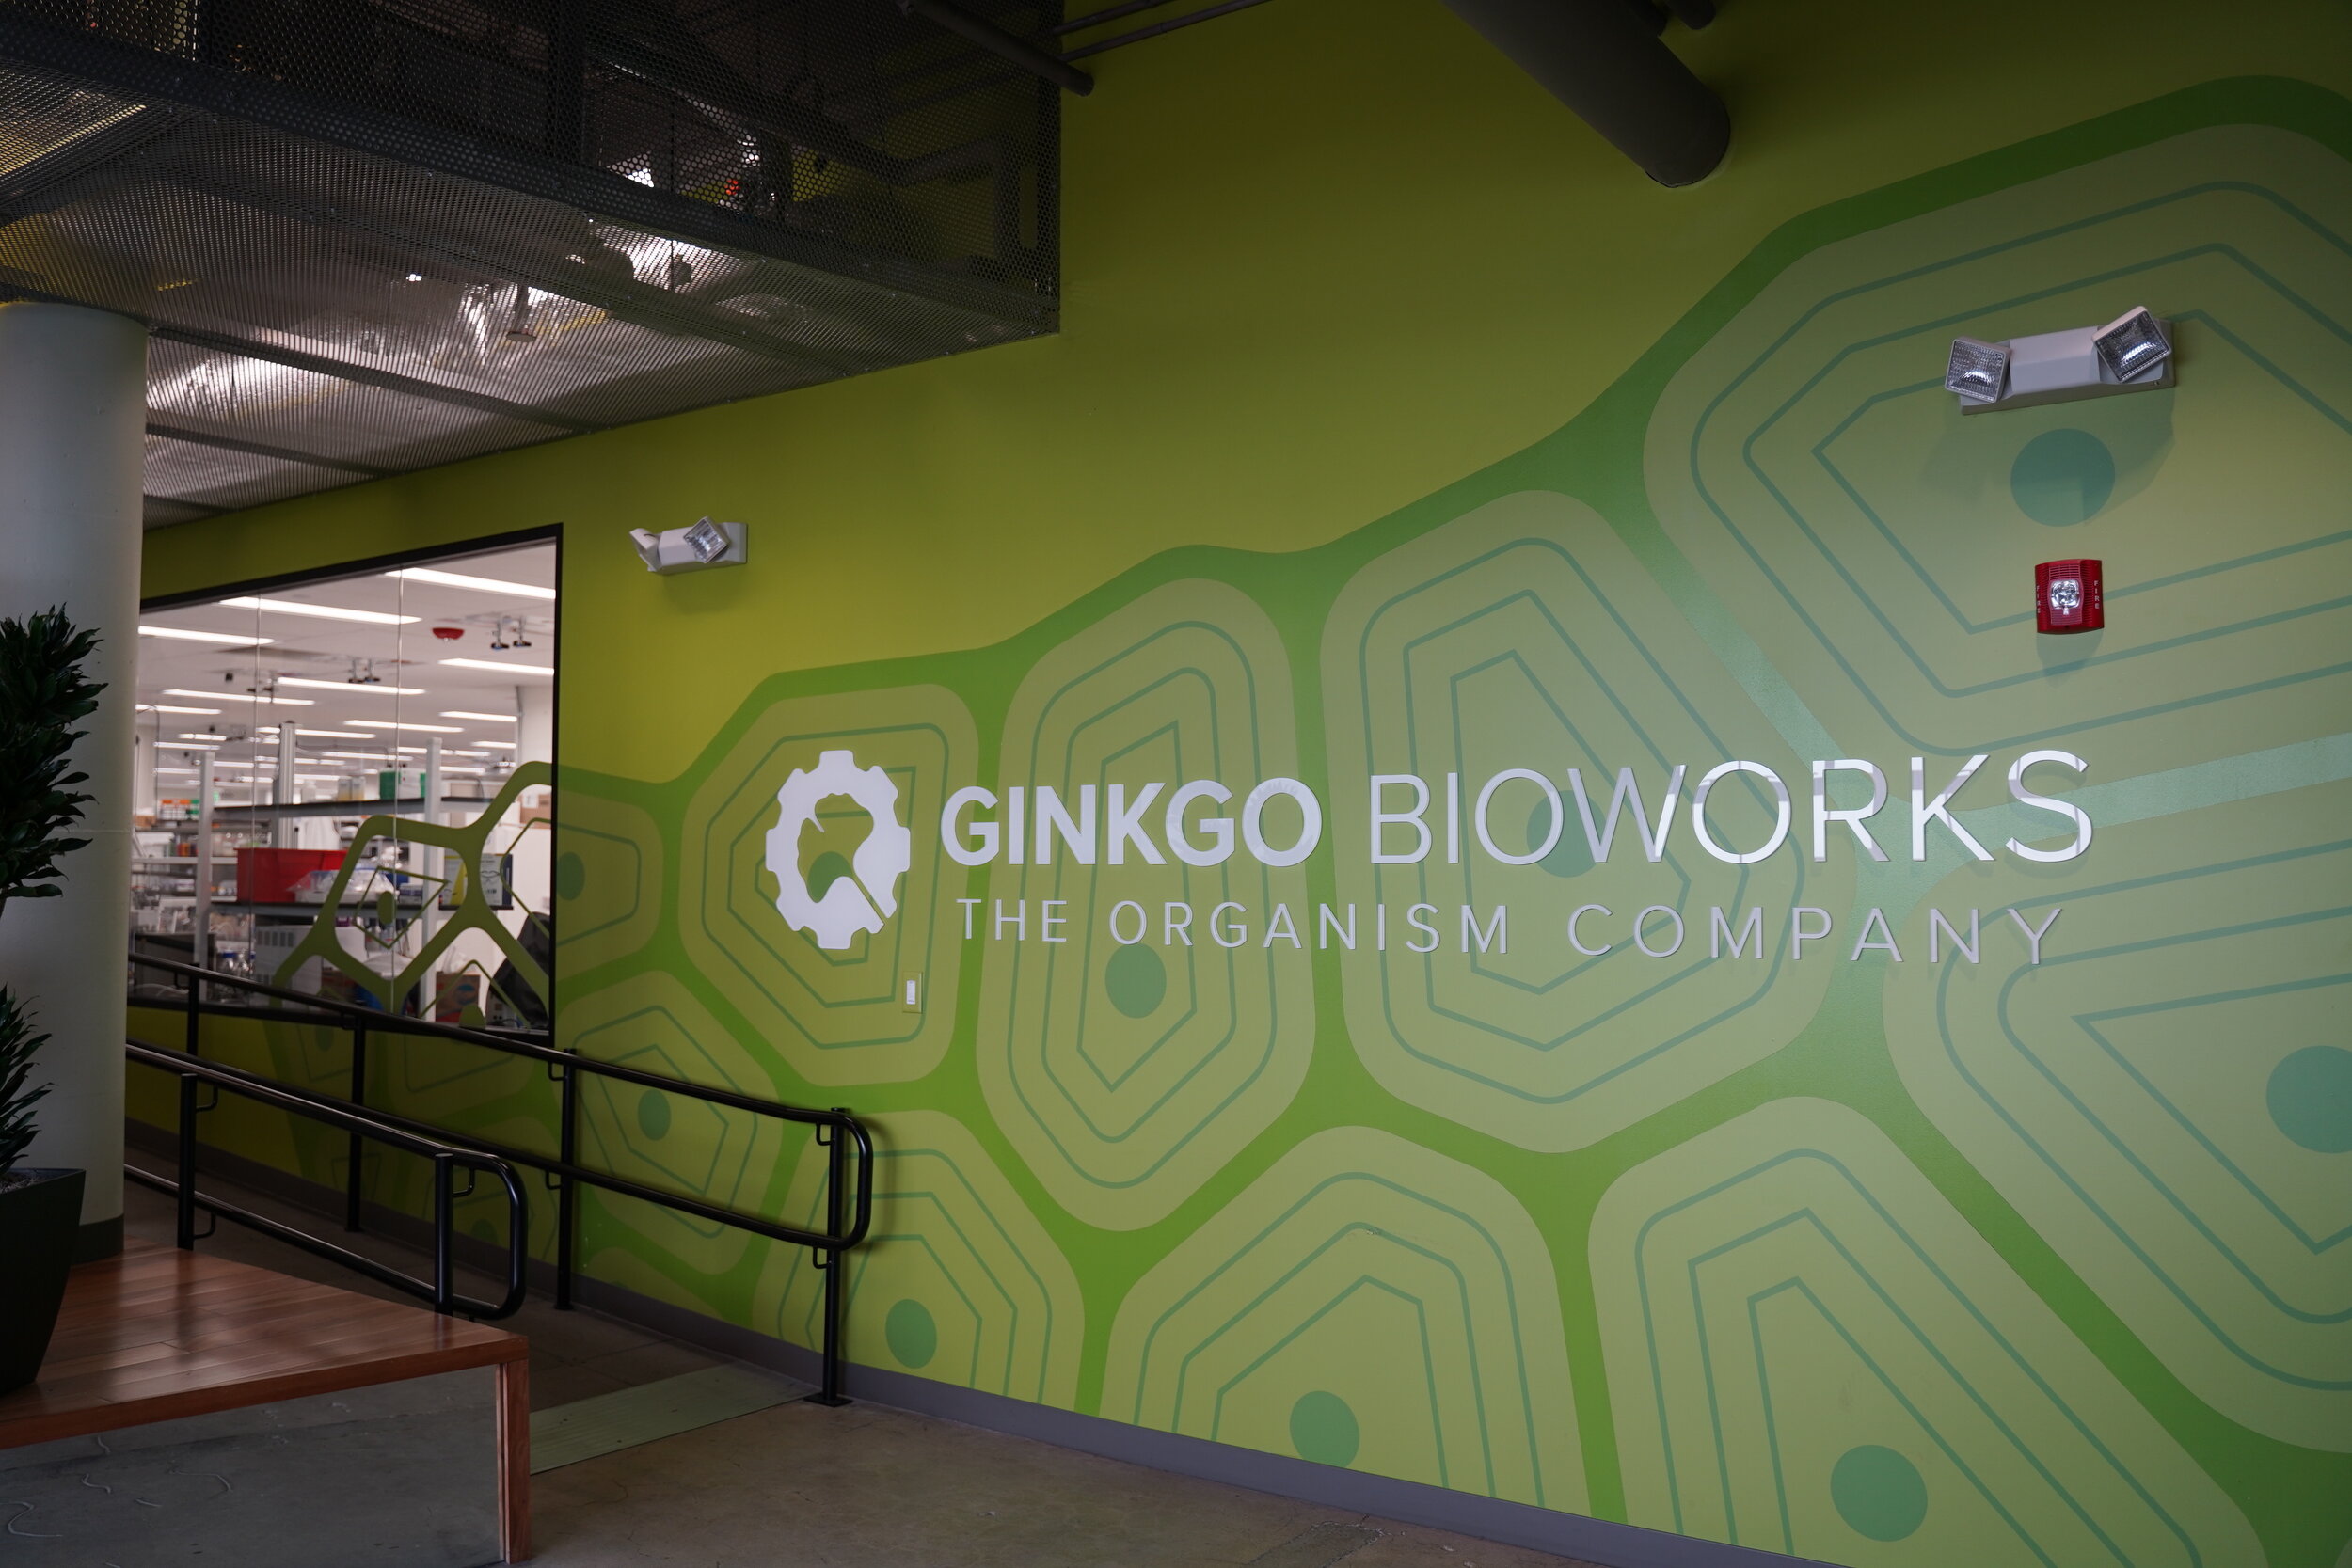 Ginkgo Bioworks office entry sign